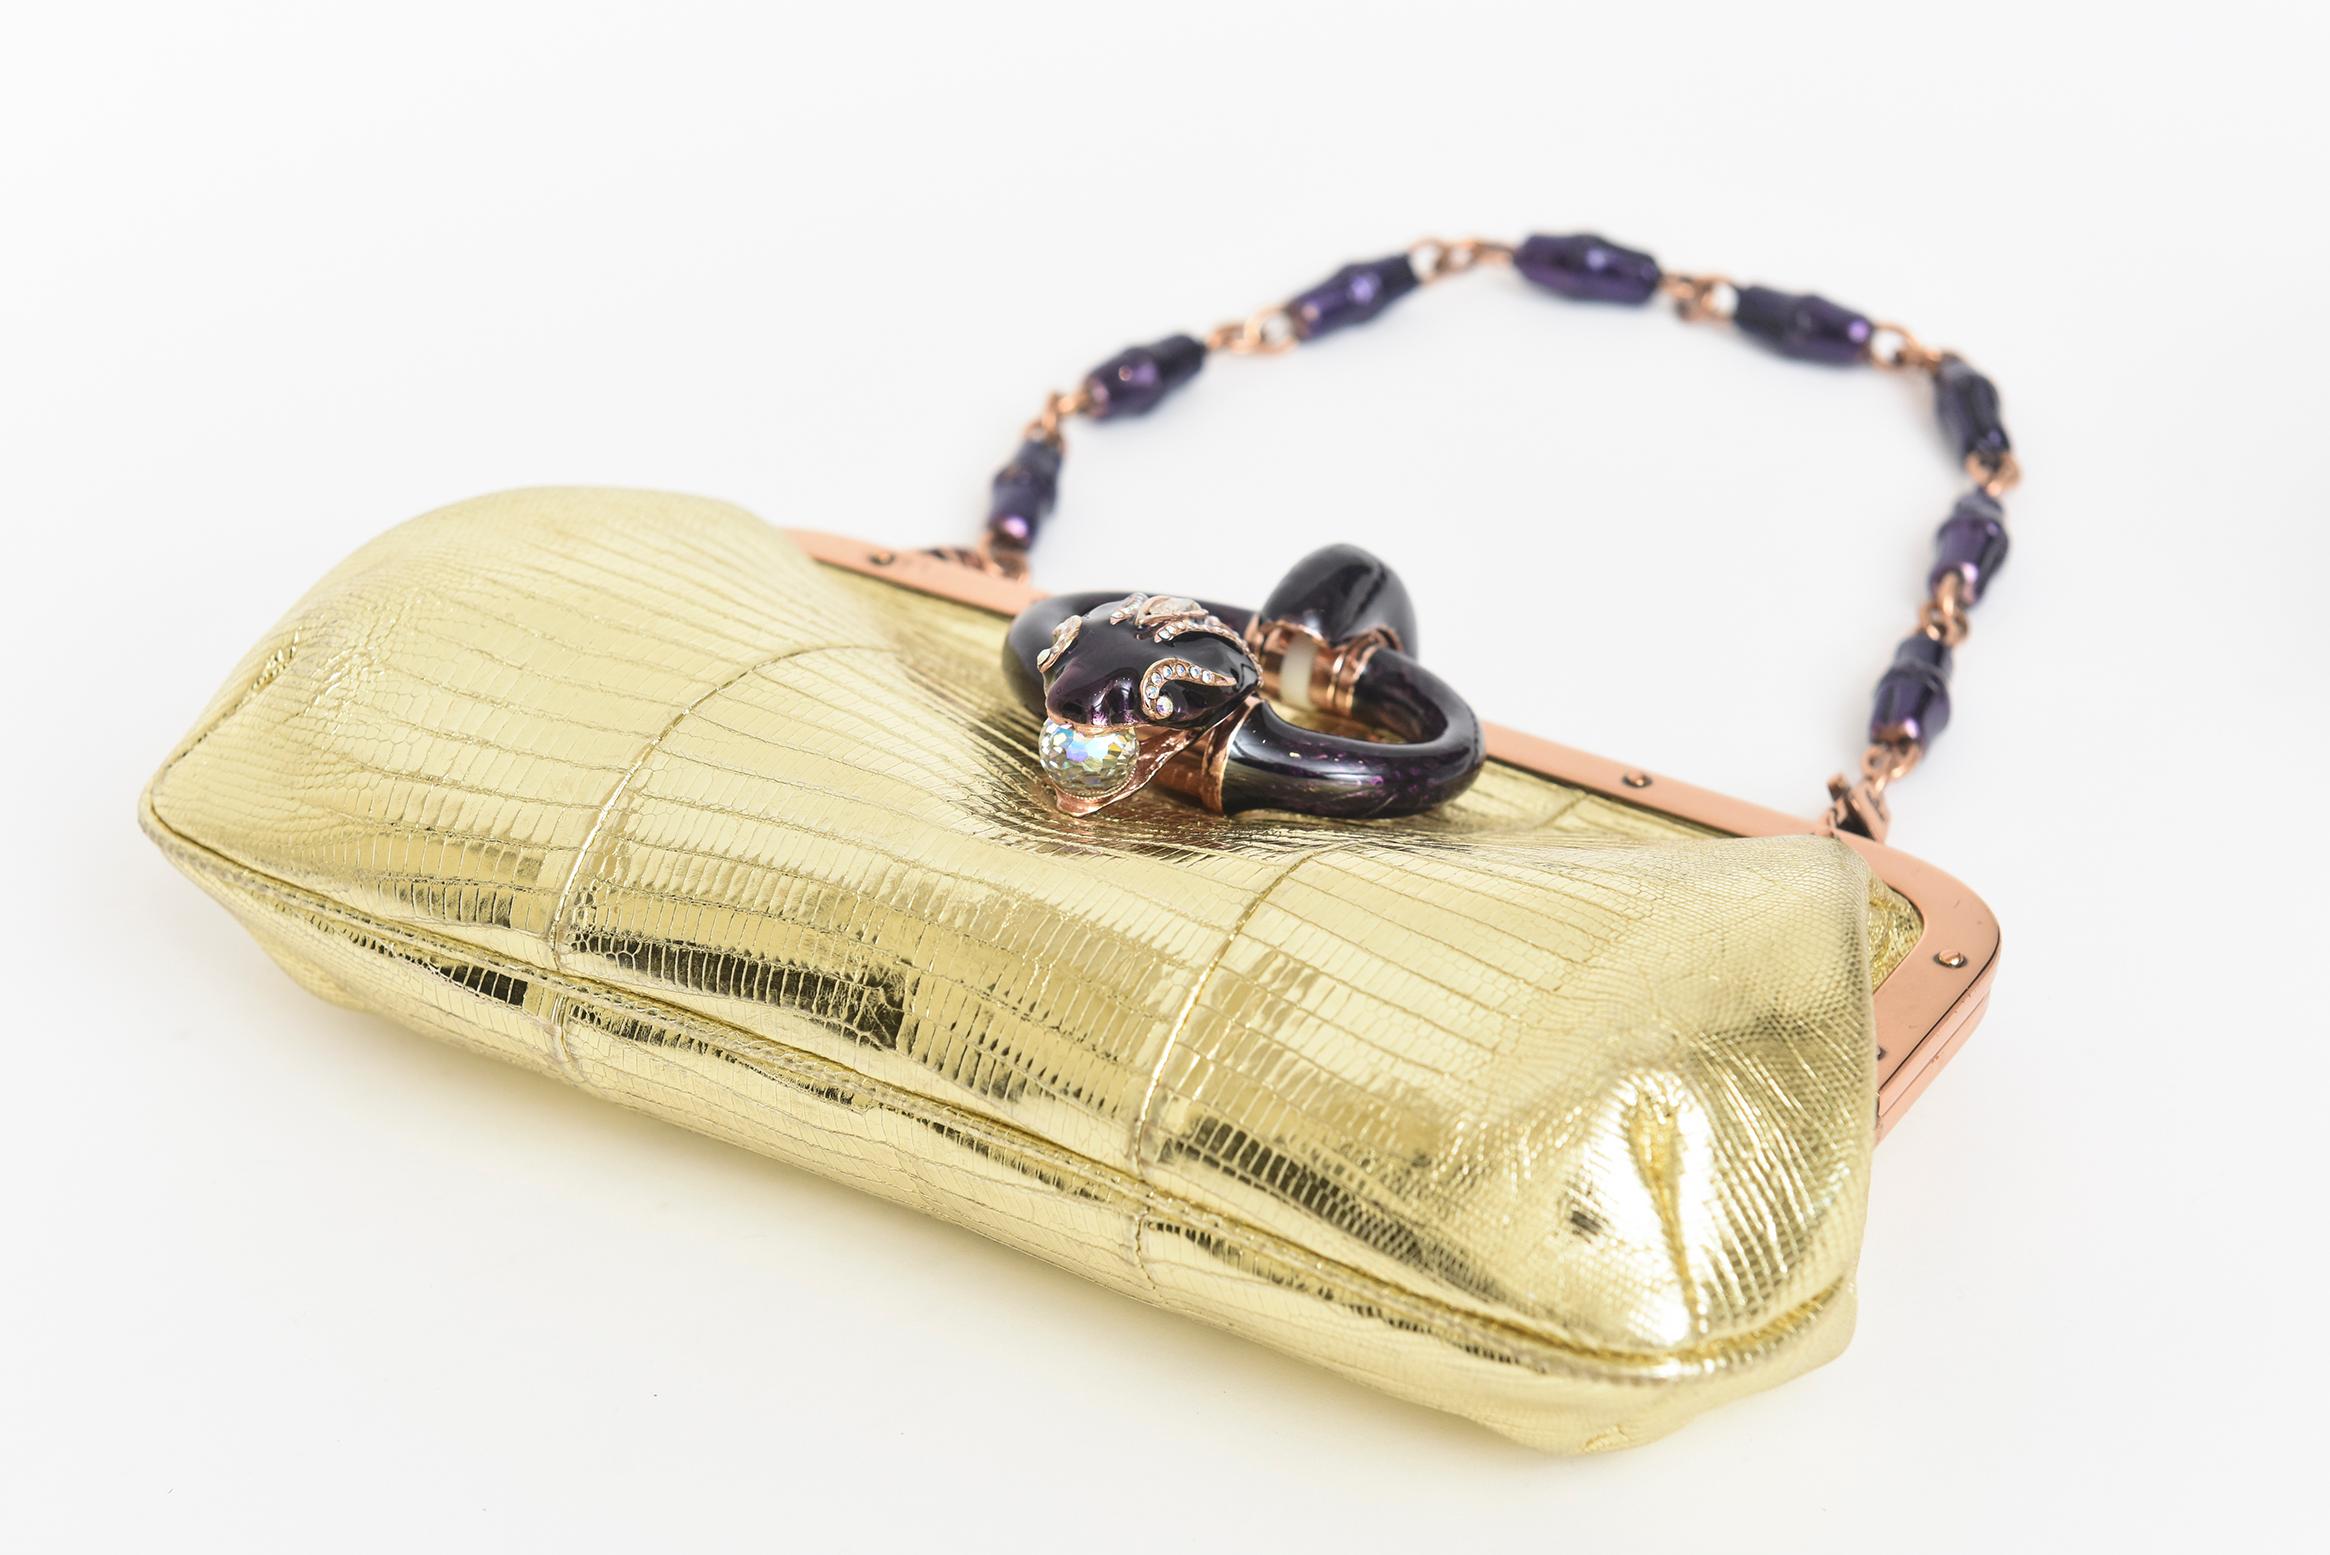 This beyond stunning and now rare evening bag was Tom Fords serpent final Collection for Gucci in 2004. It was a limited edition and a runway piece. It is gold lizard leather with rose gold trimming and amethyst serpent closure. The removable handle